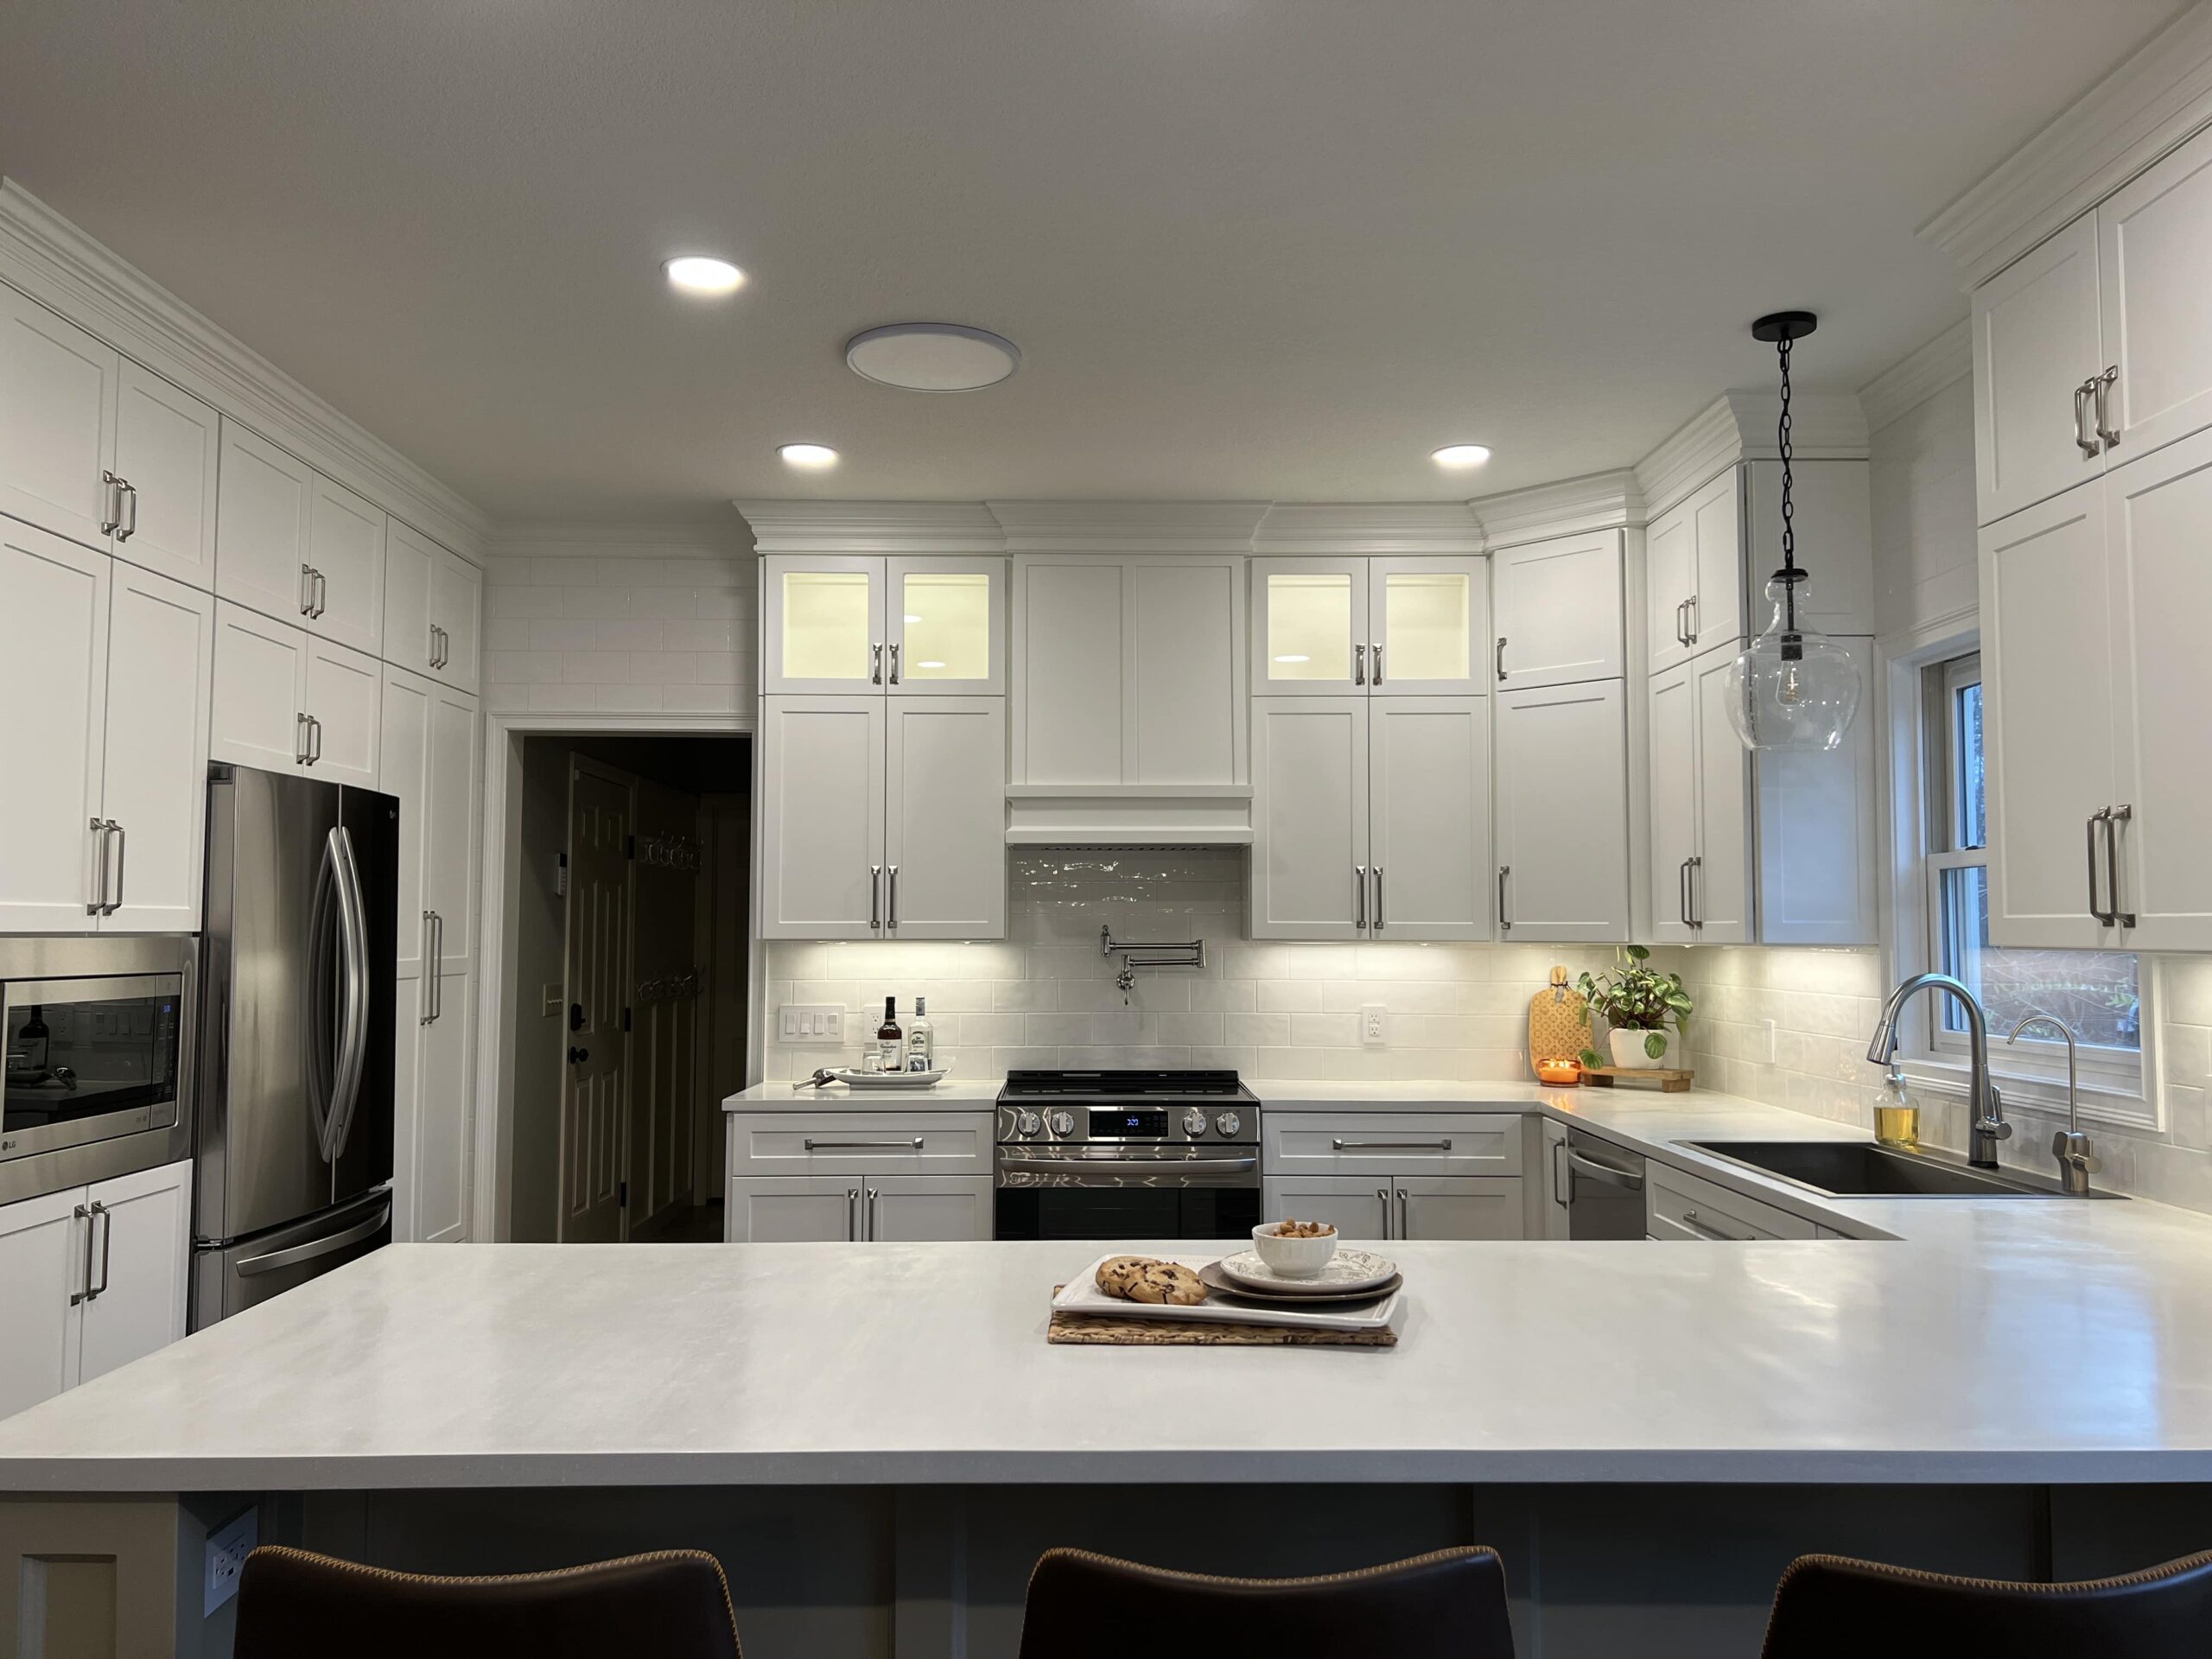 Clean, modern kitchen with white door refacing fronts.